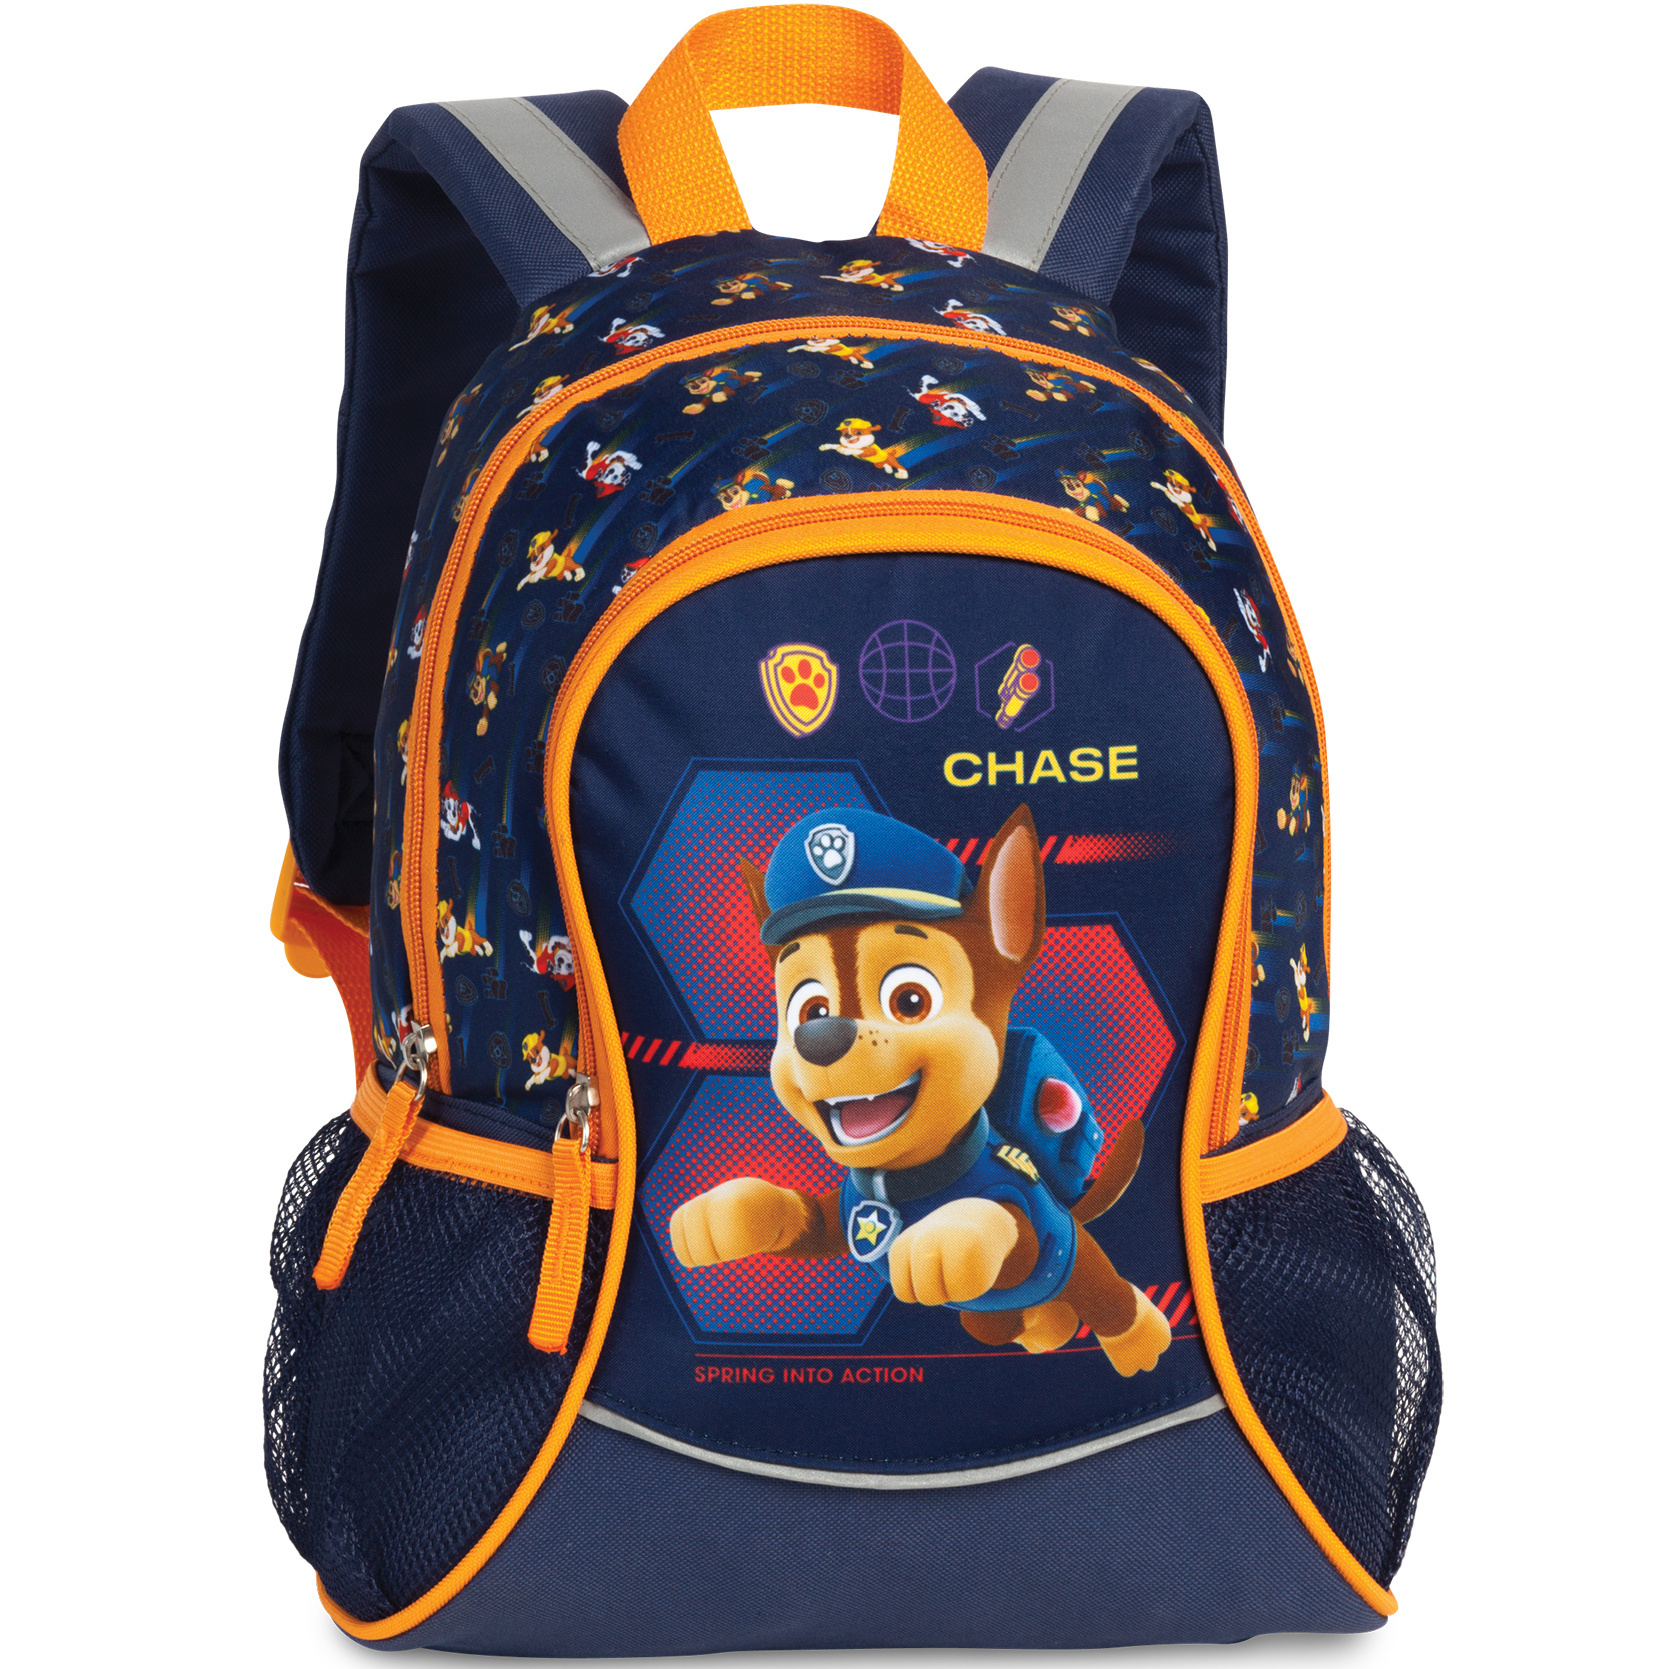 Paw Patrol Backpack Chase - 35 x 27 x 15 cm - Polyester